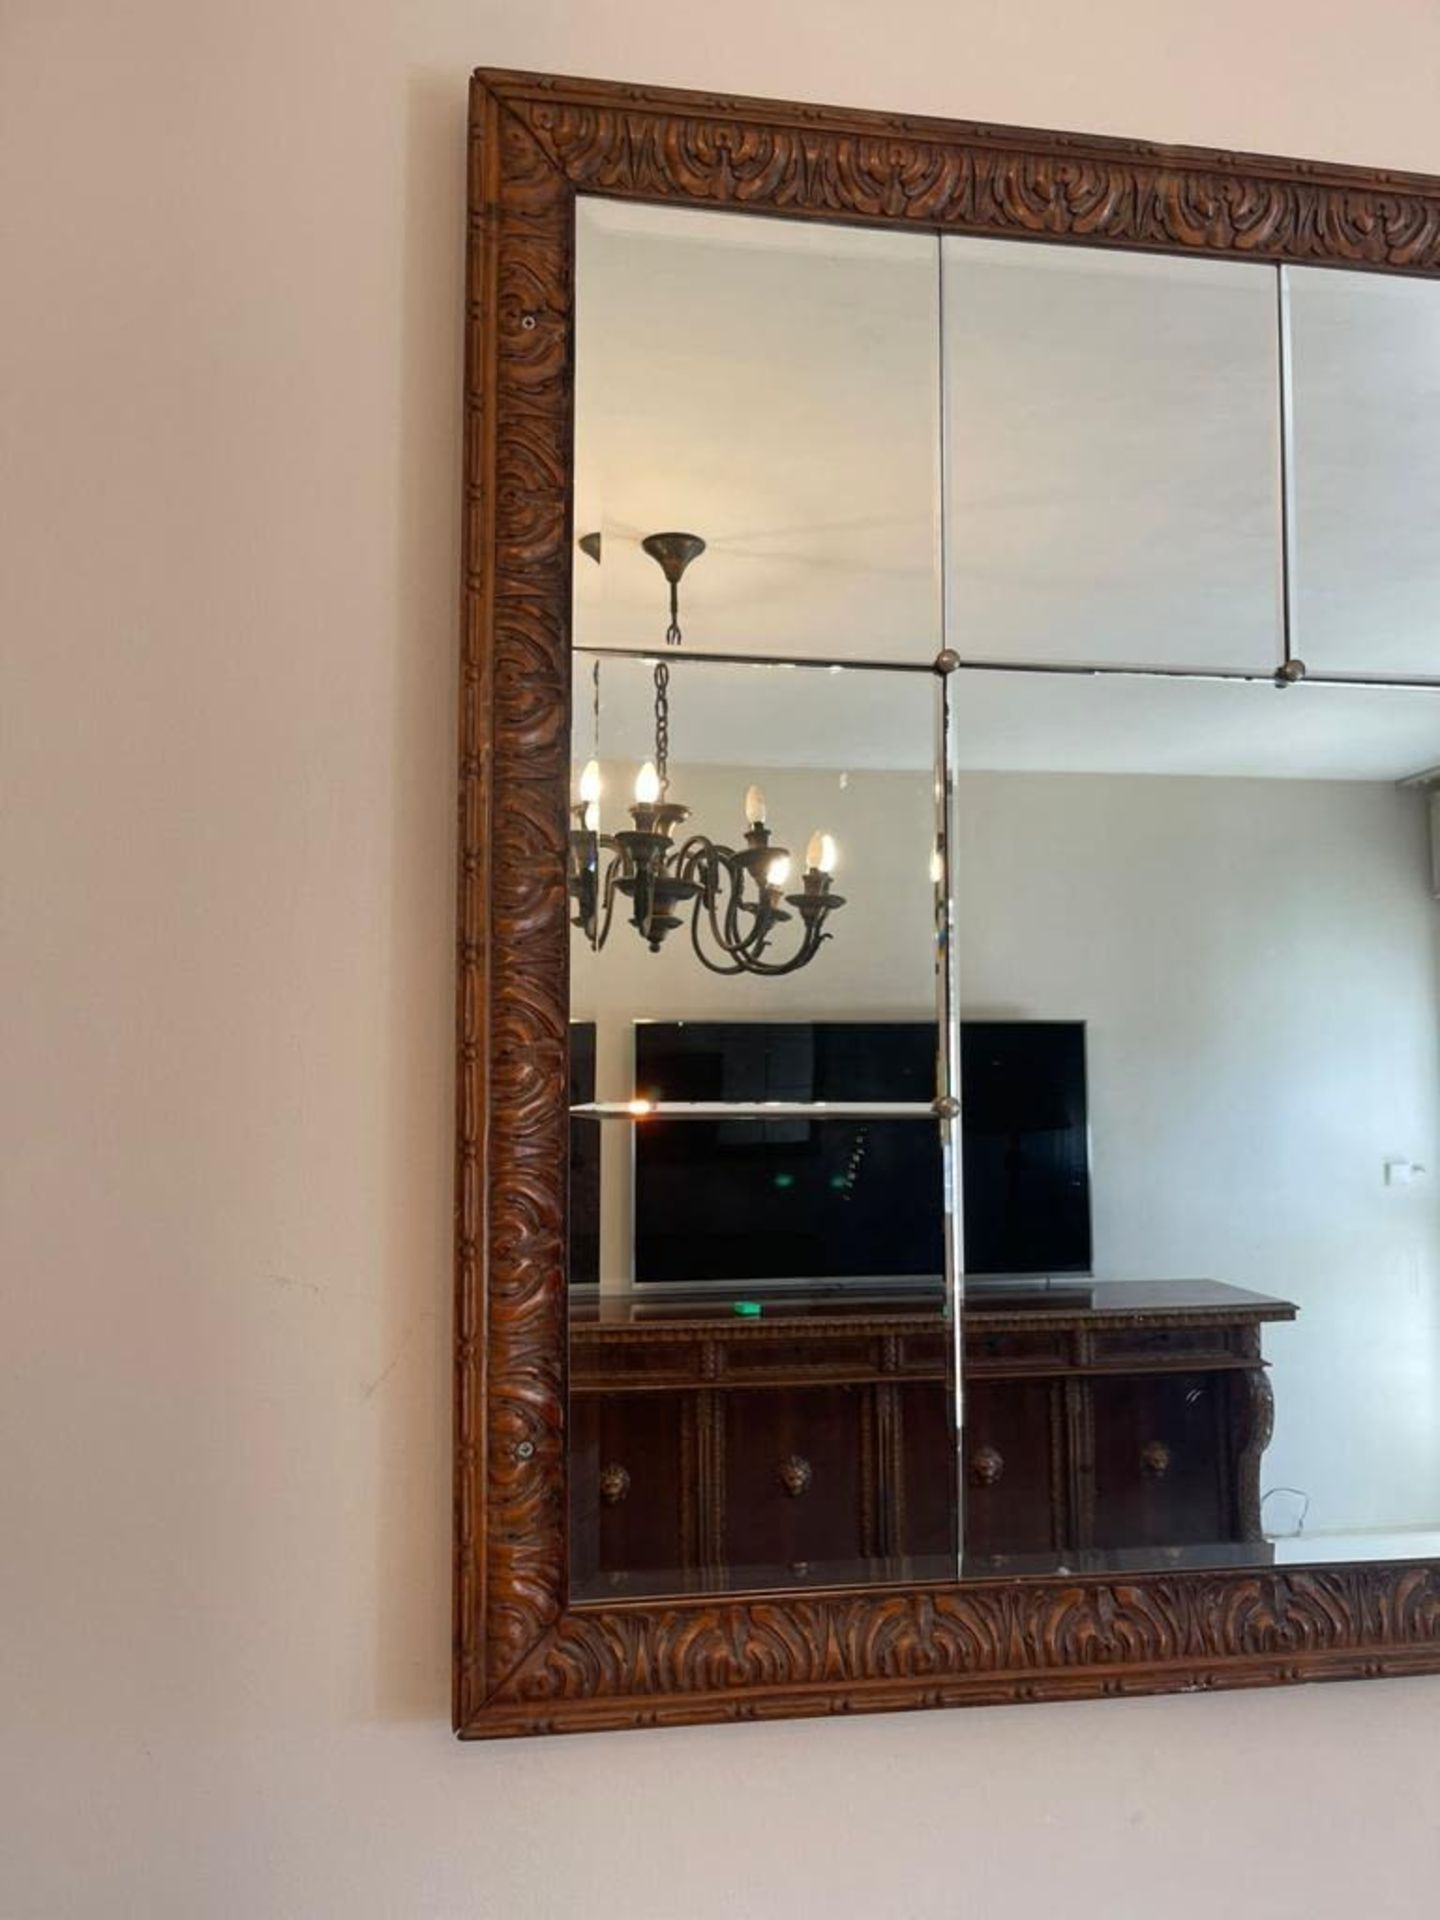 Rectangular mirror, antique style mirror, made of wood. Dimensions: Width: 197 cm. Length: 107